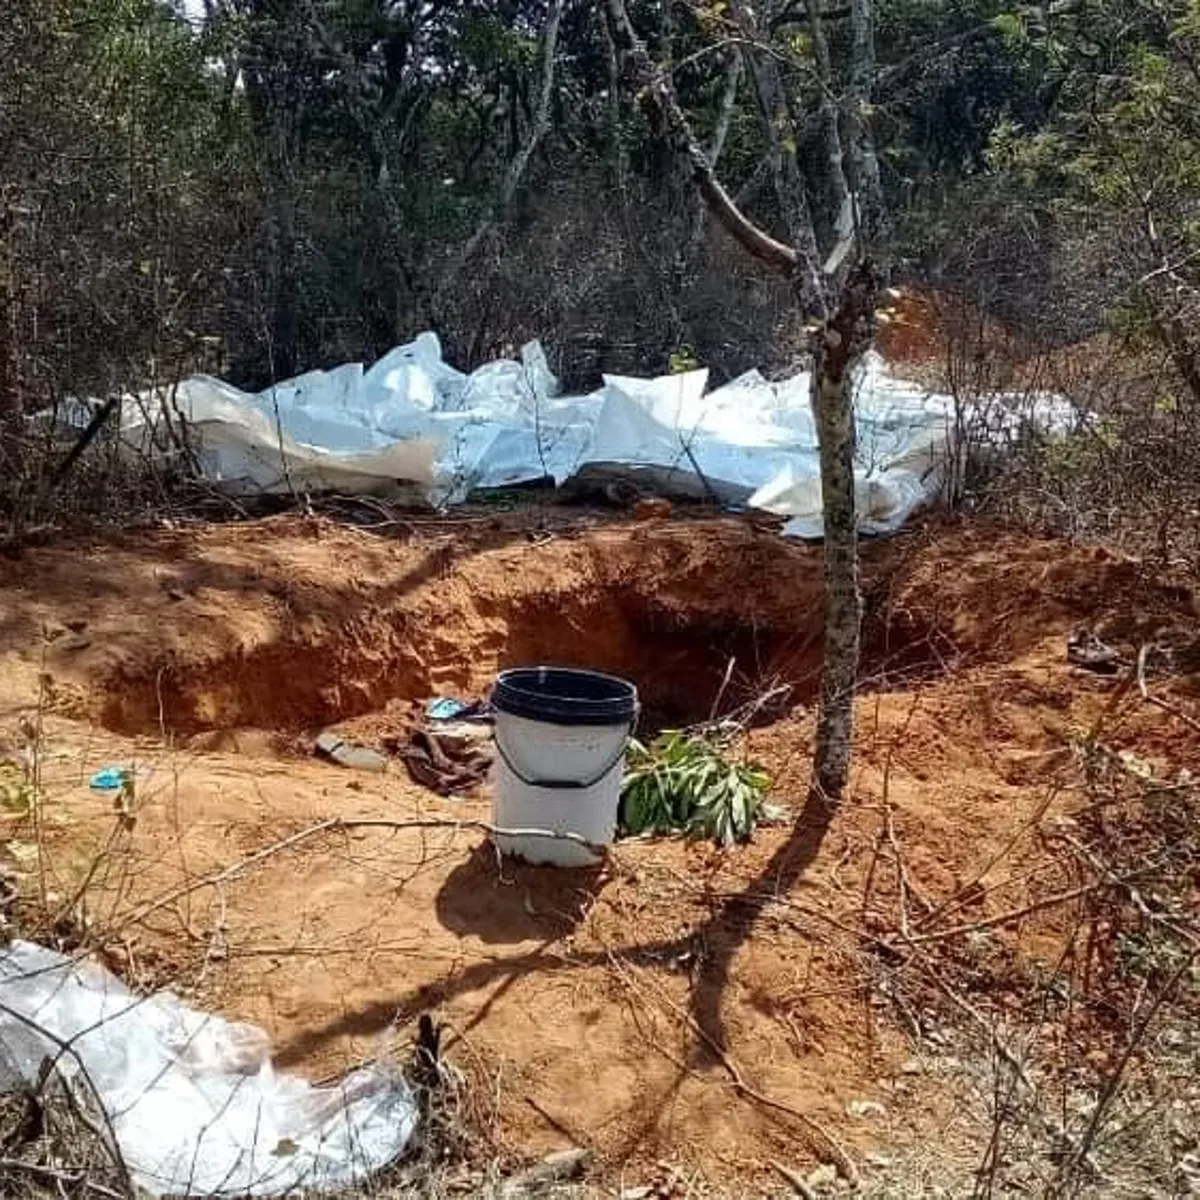 Malawi: A Mass Grave Has Been Discovered With Bodies of Suspected Migrants